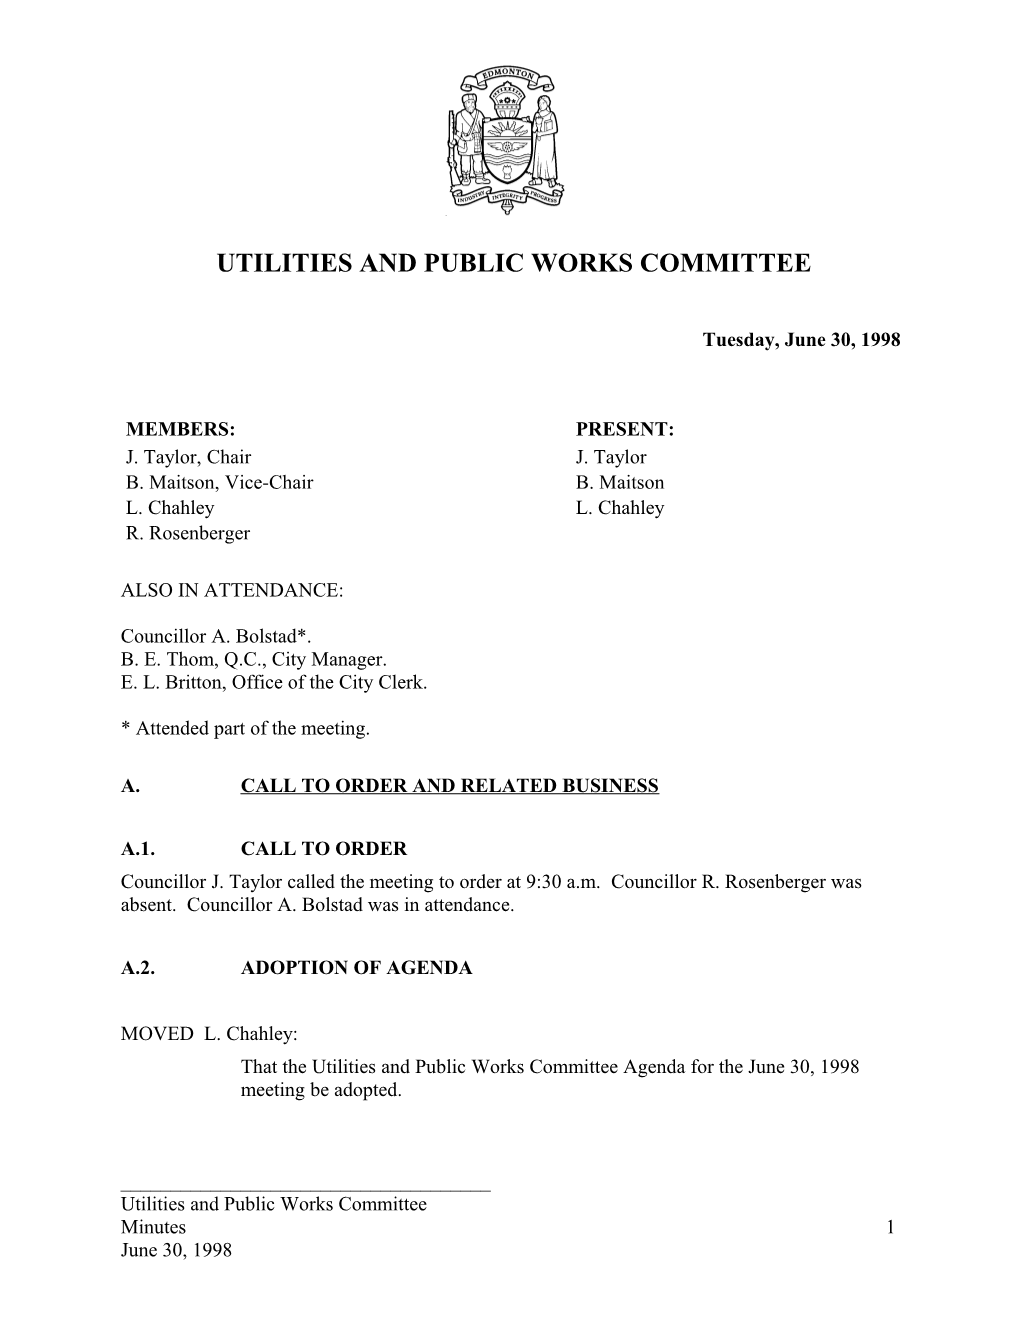 Minutes for Utilities and Public Works Committee June 30, 1998 Meeting